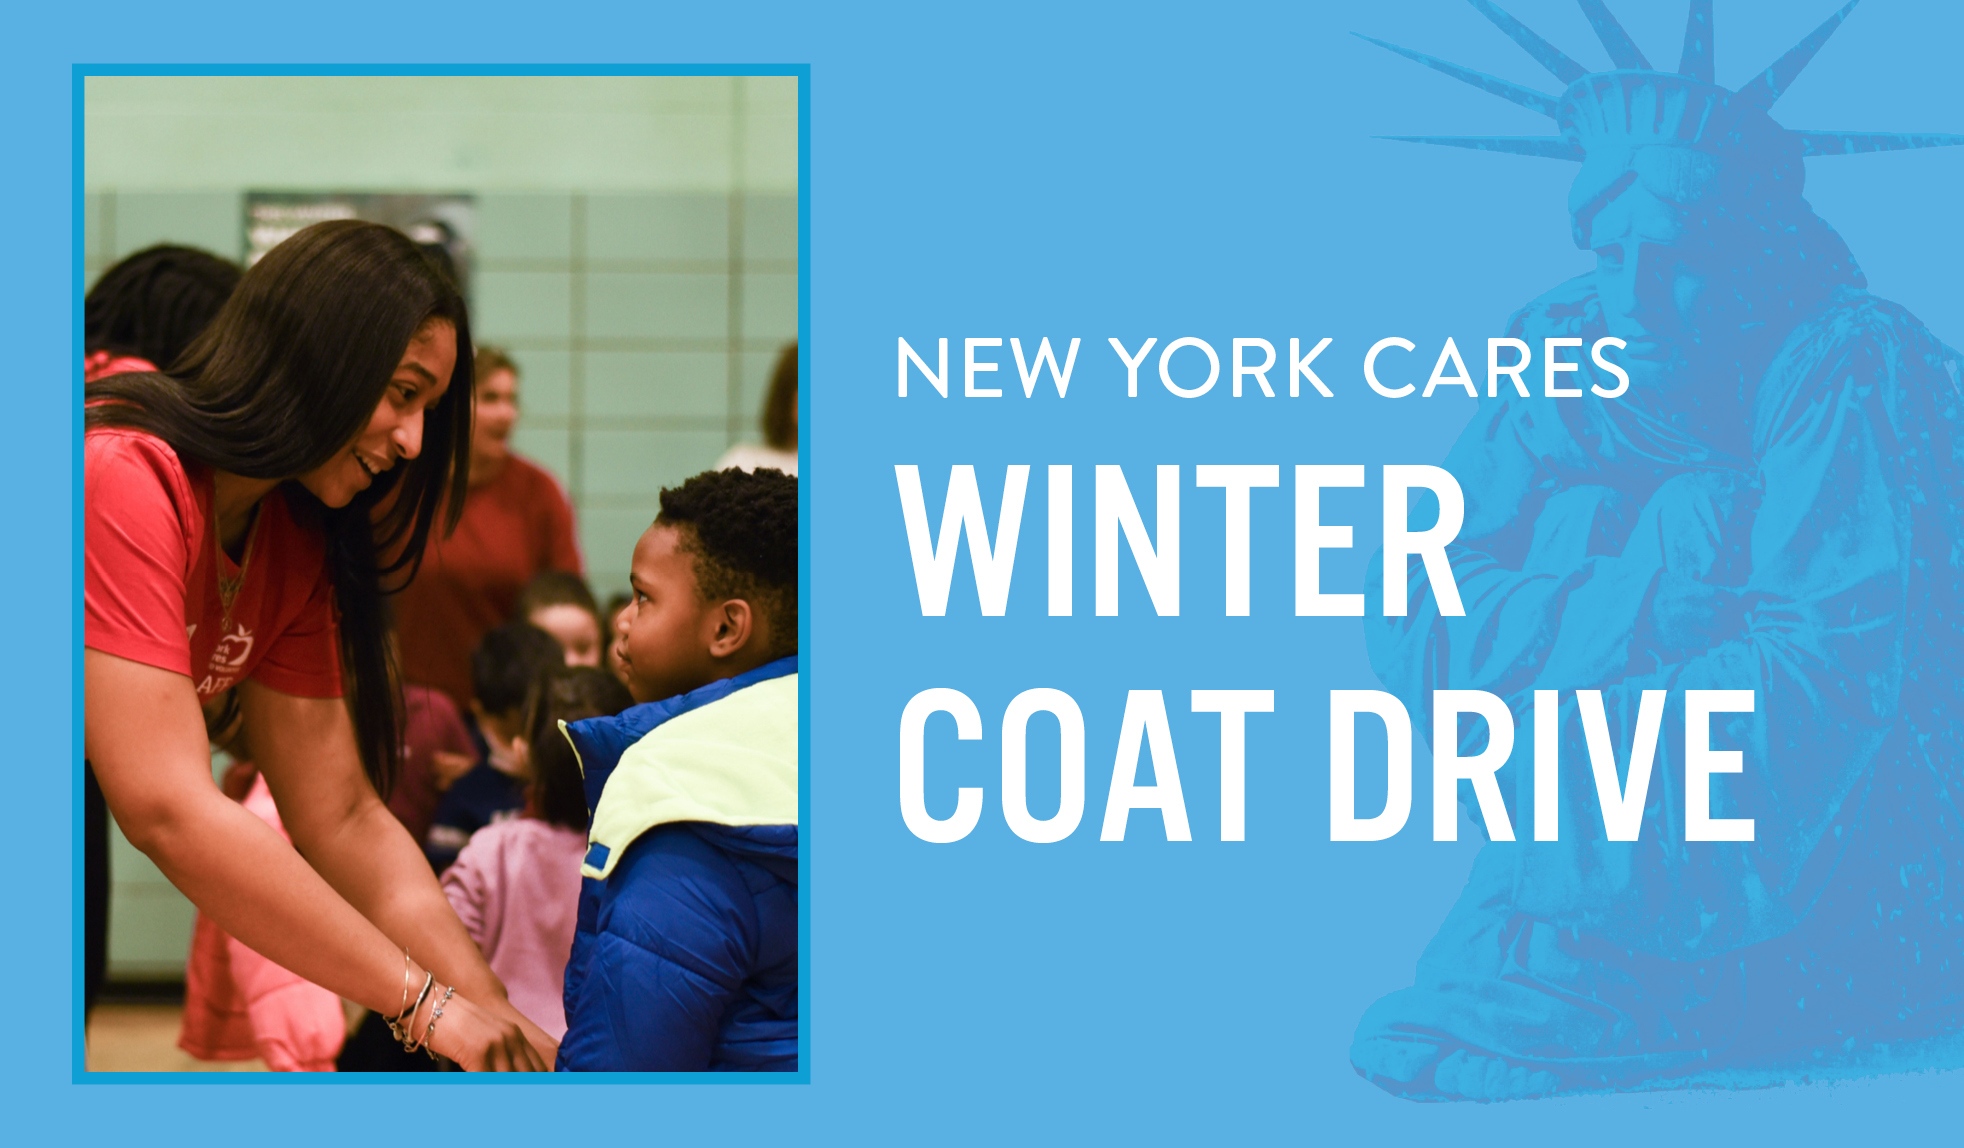 You can donate new and gently used winter coats for children and adults at 14 QPL locations.